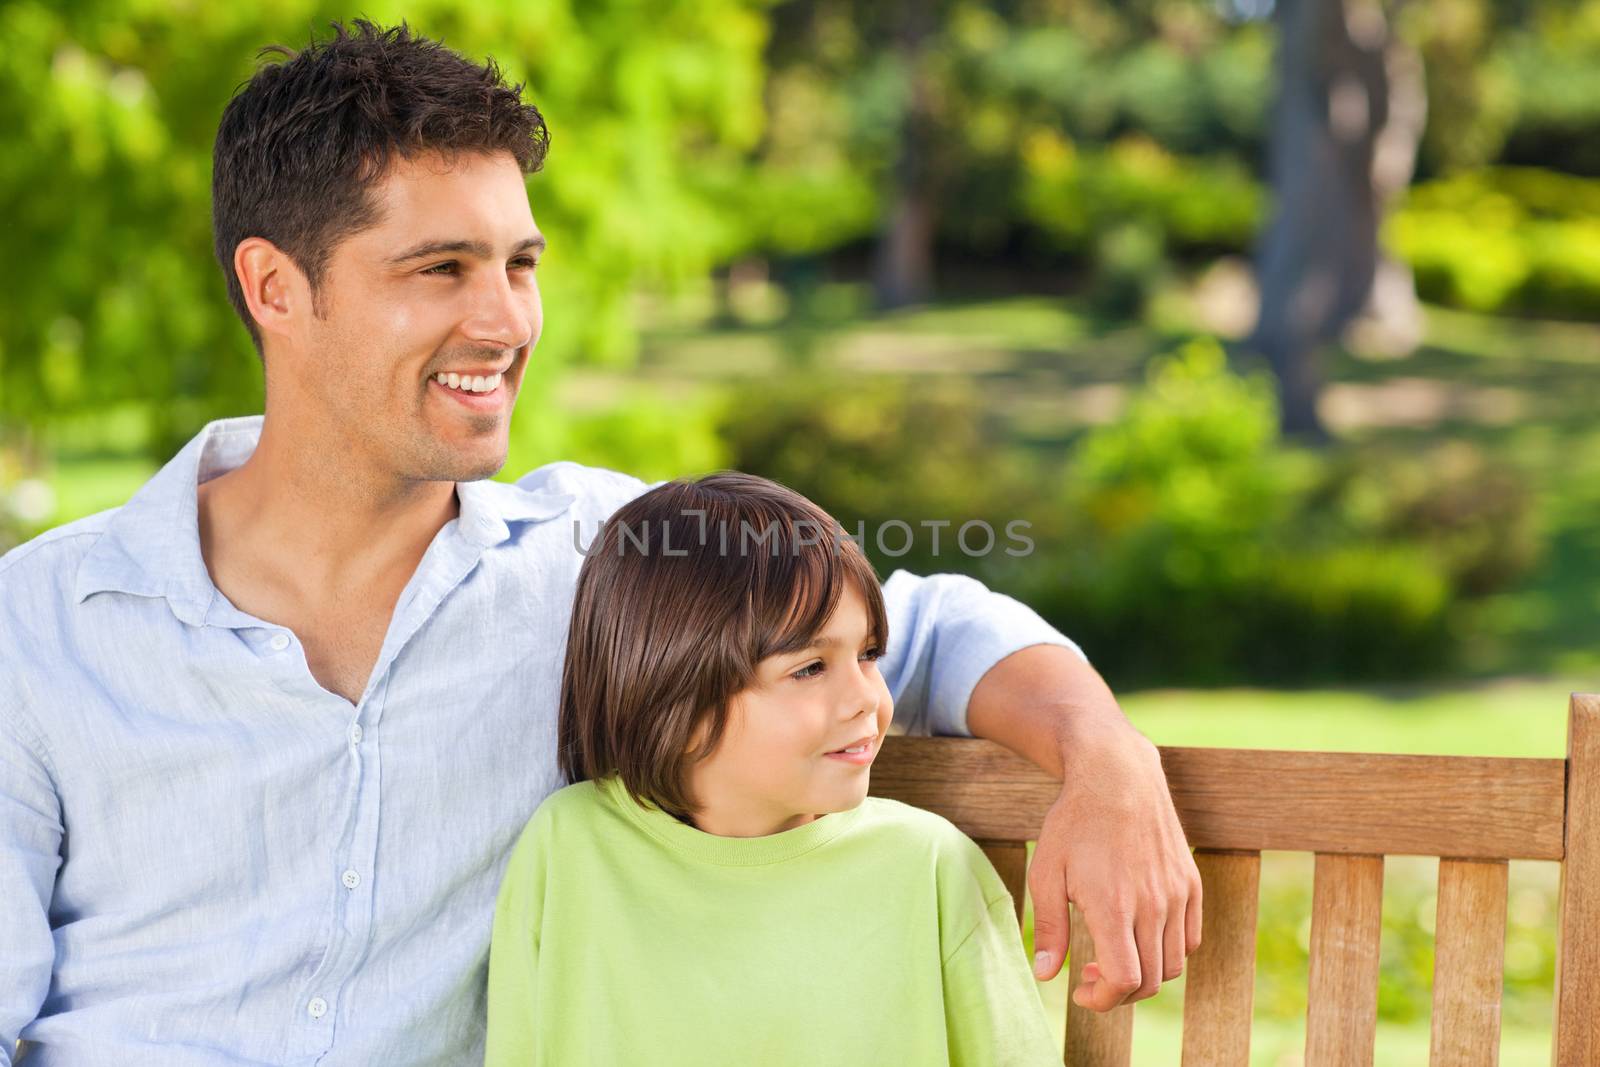 Son with his father on the bench during the summer